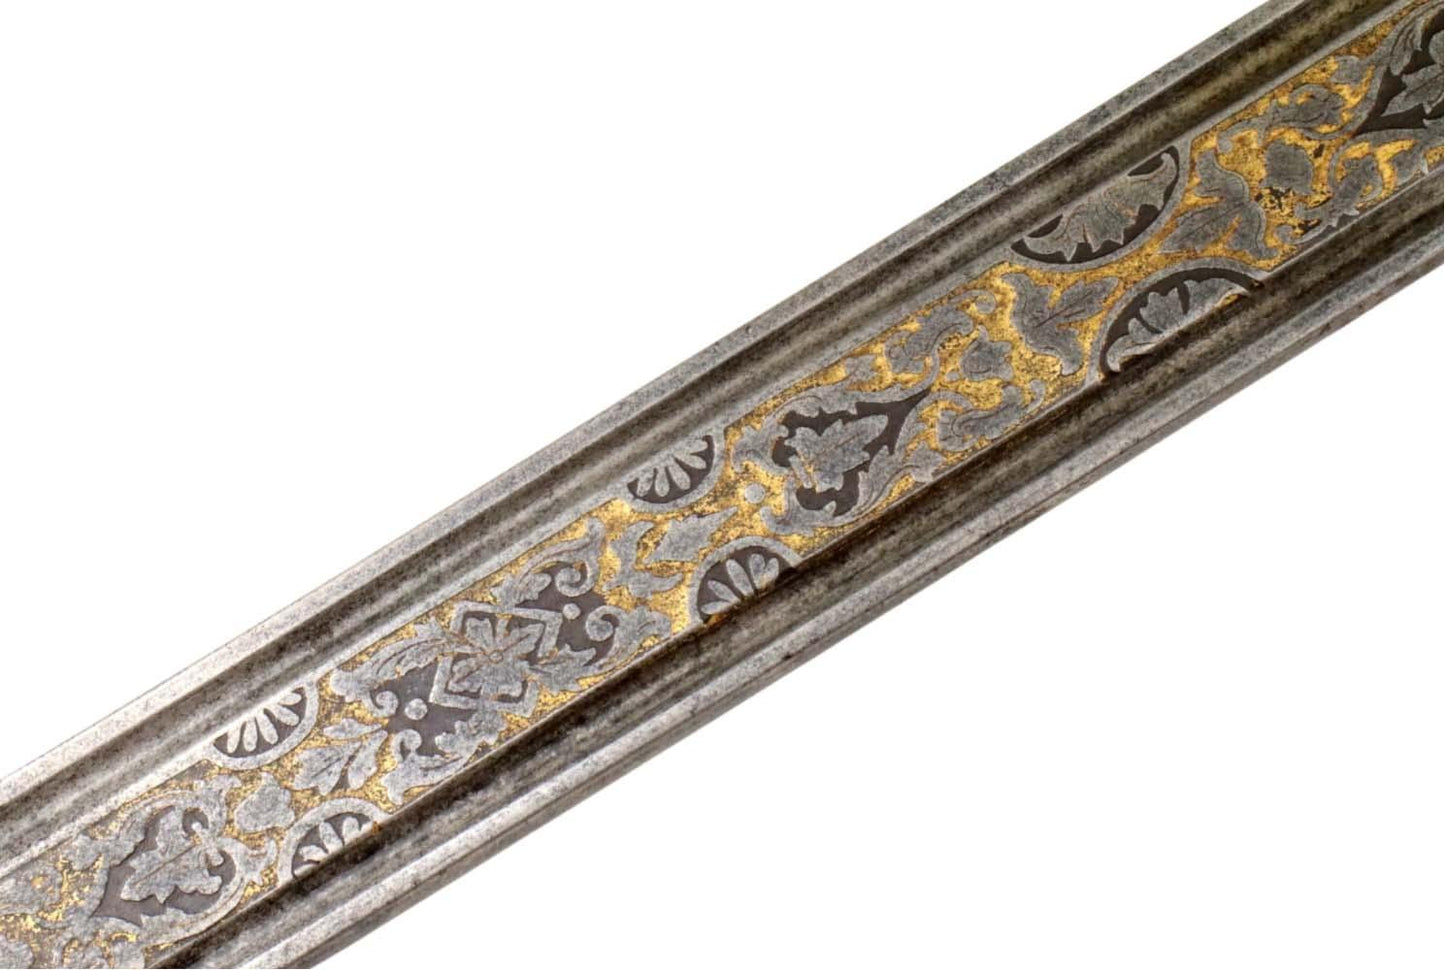 Spanish or Mexican 1880 Senior Officer's Sword with Ancestral 18th C. heavily silvered and gold overlaid Iron Hilt and Toledo Blade